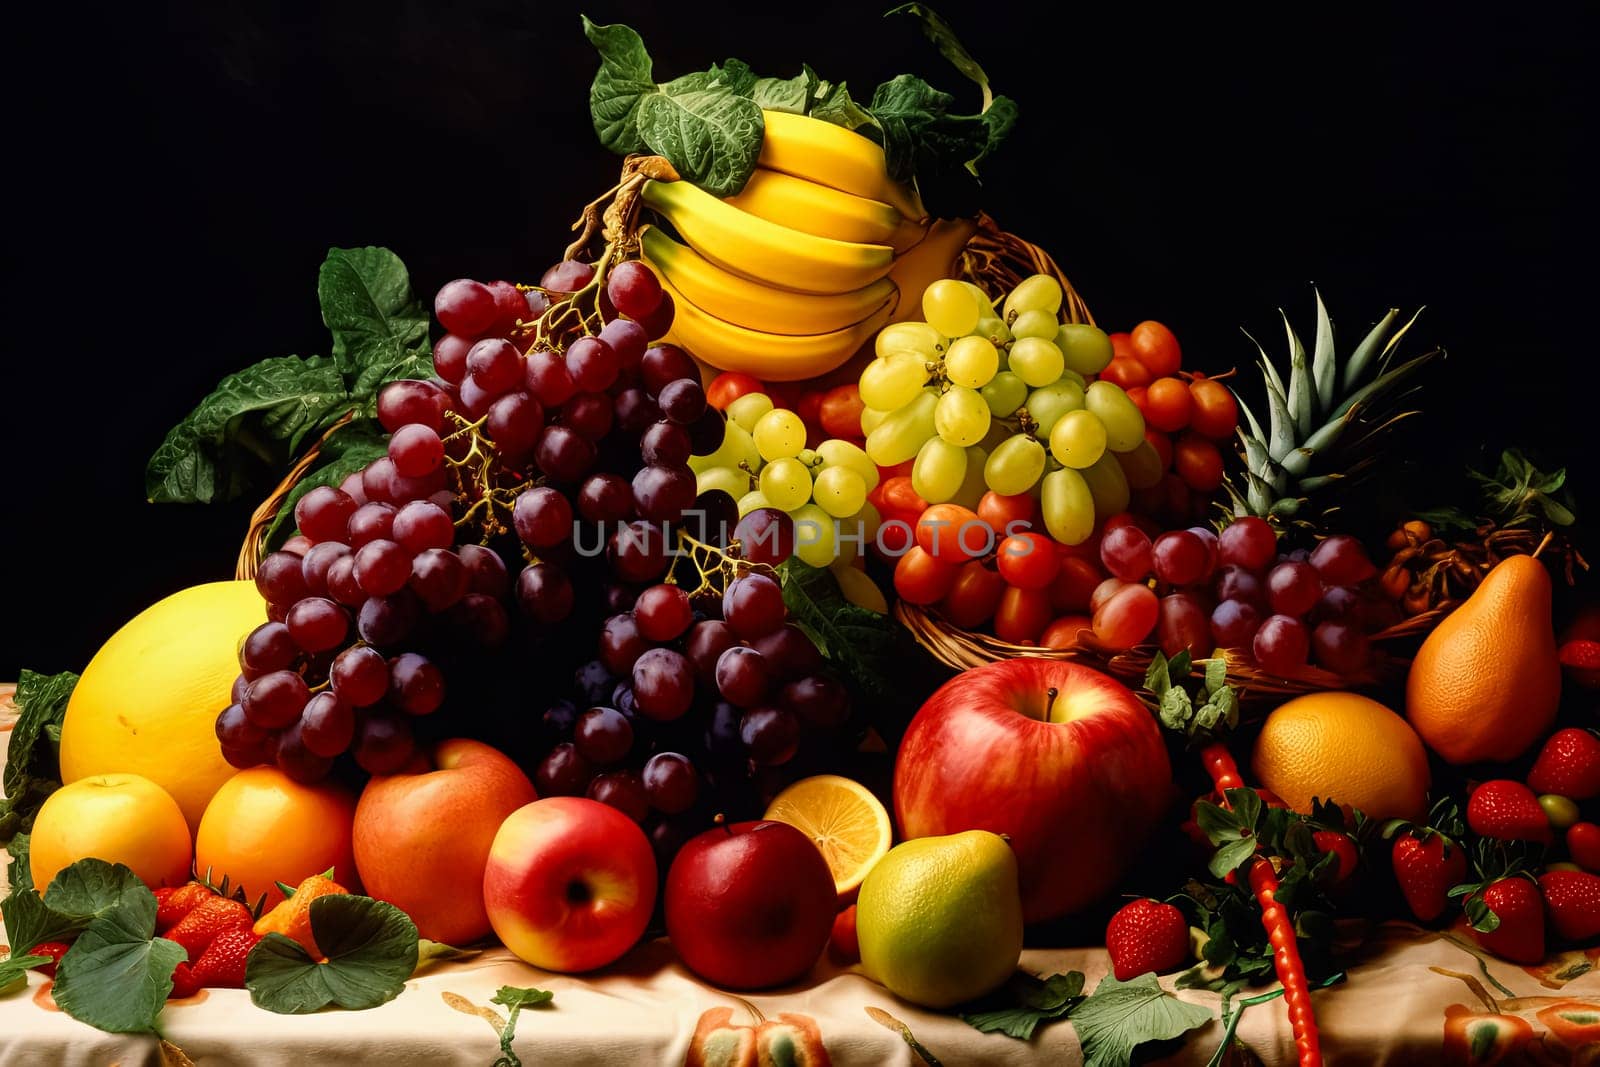 A table full of fruit including apples, oranges, bananas, and grapes. Concept of abundance and freshness